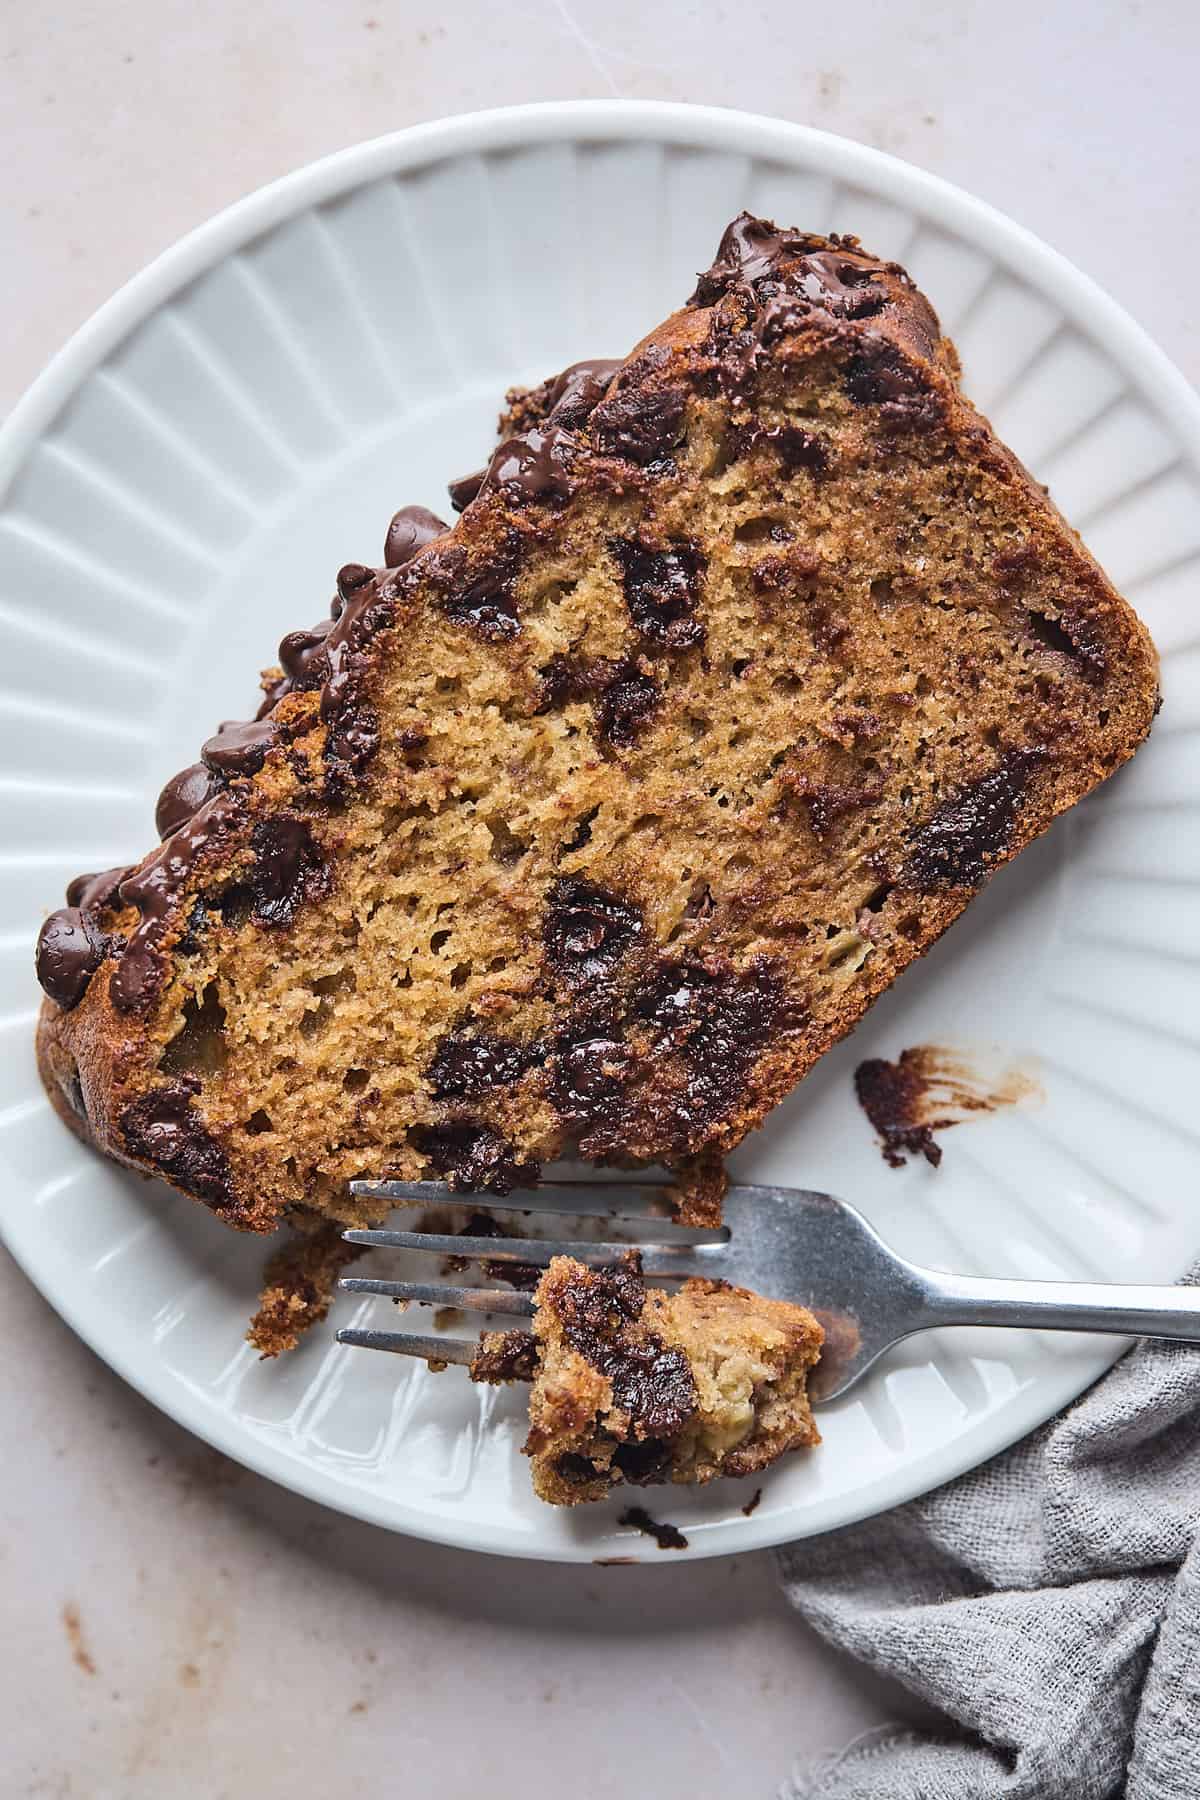 A slice of chocolate chip banana bread being eaten with a fork on a white plate